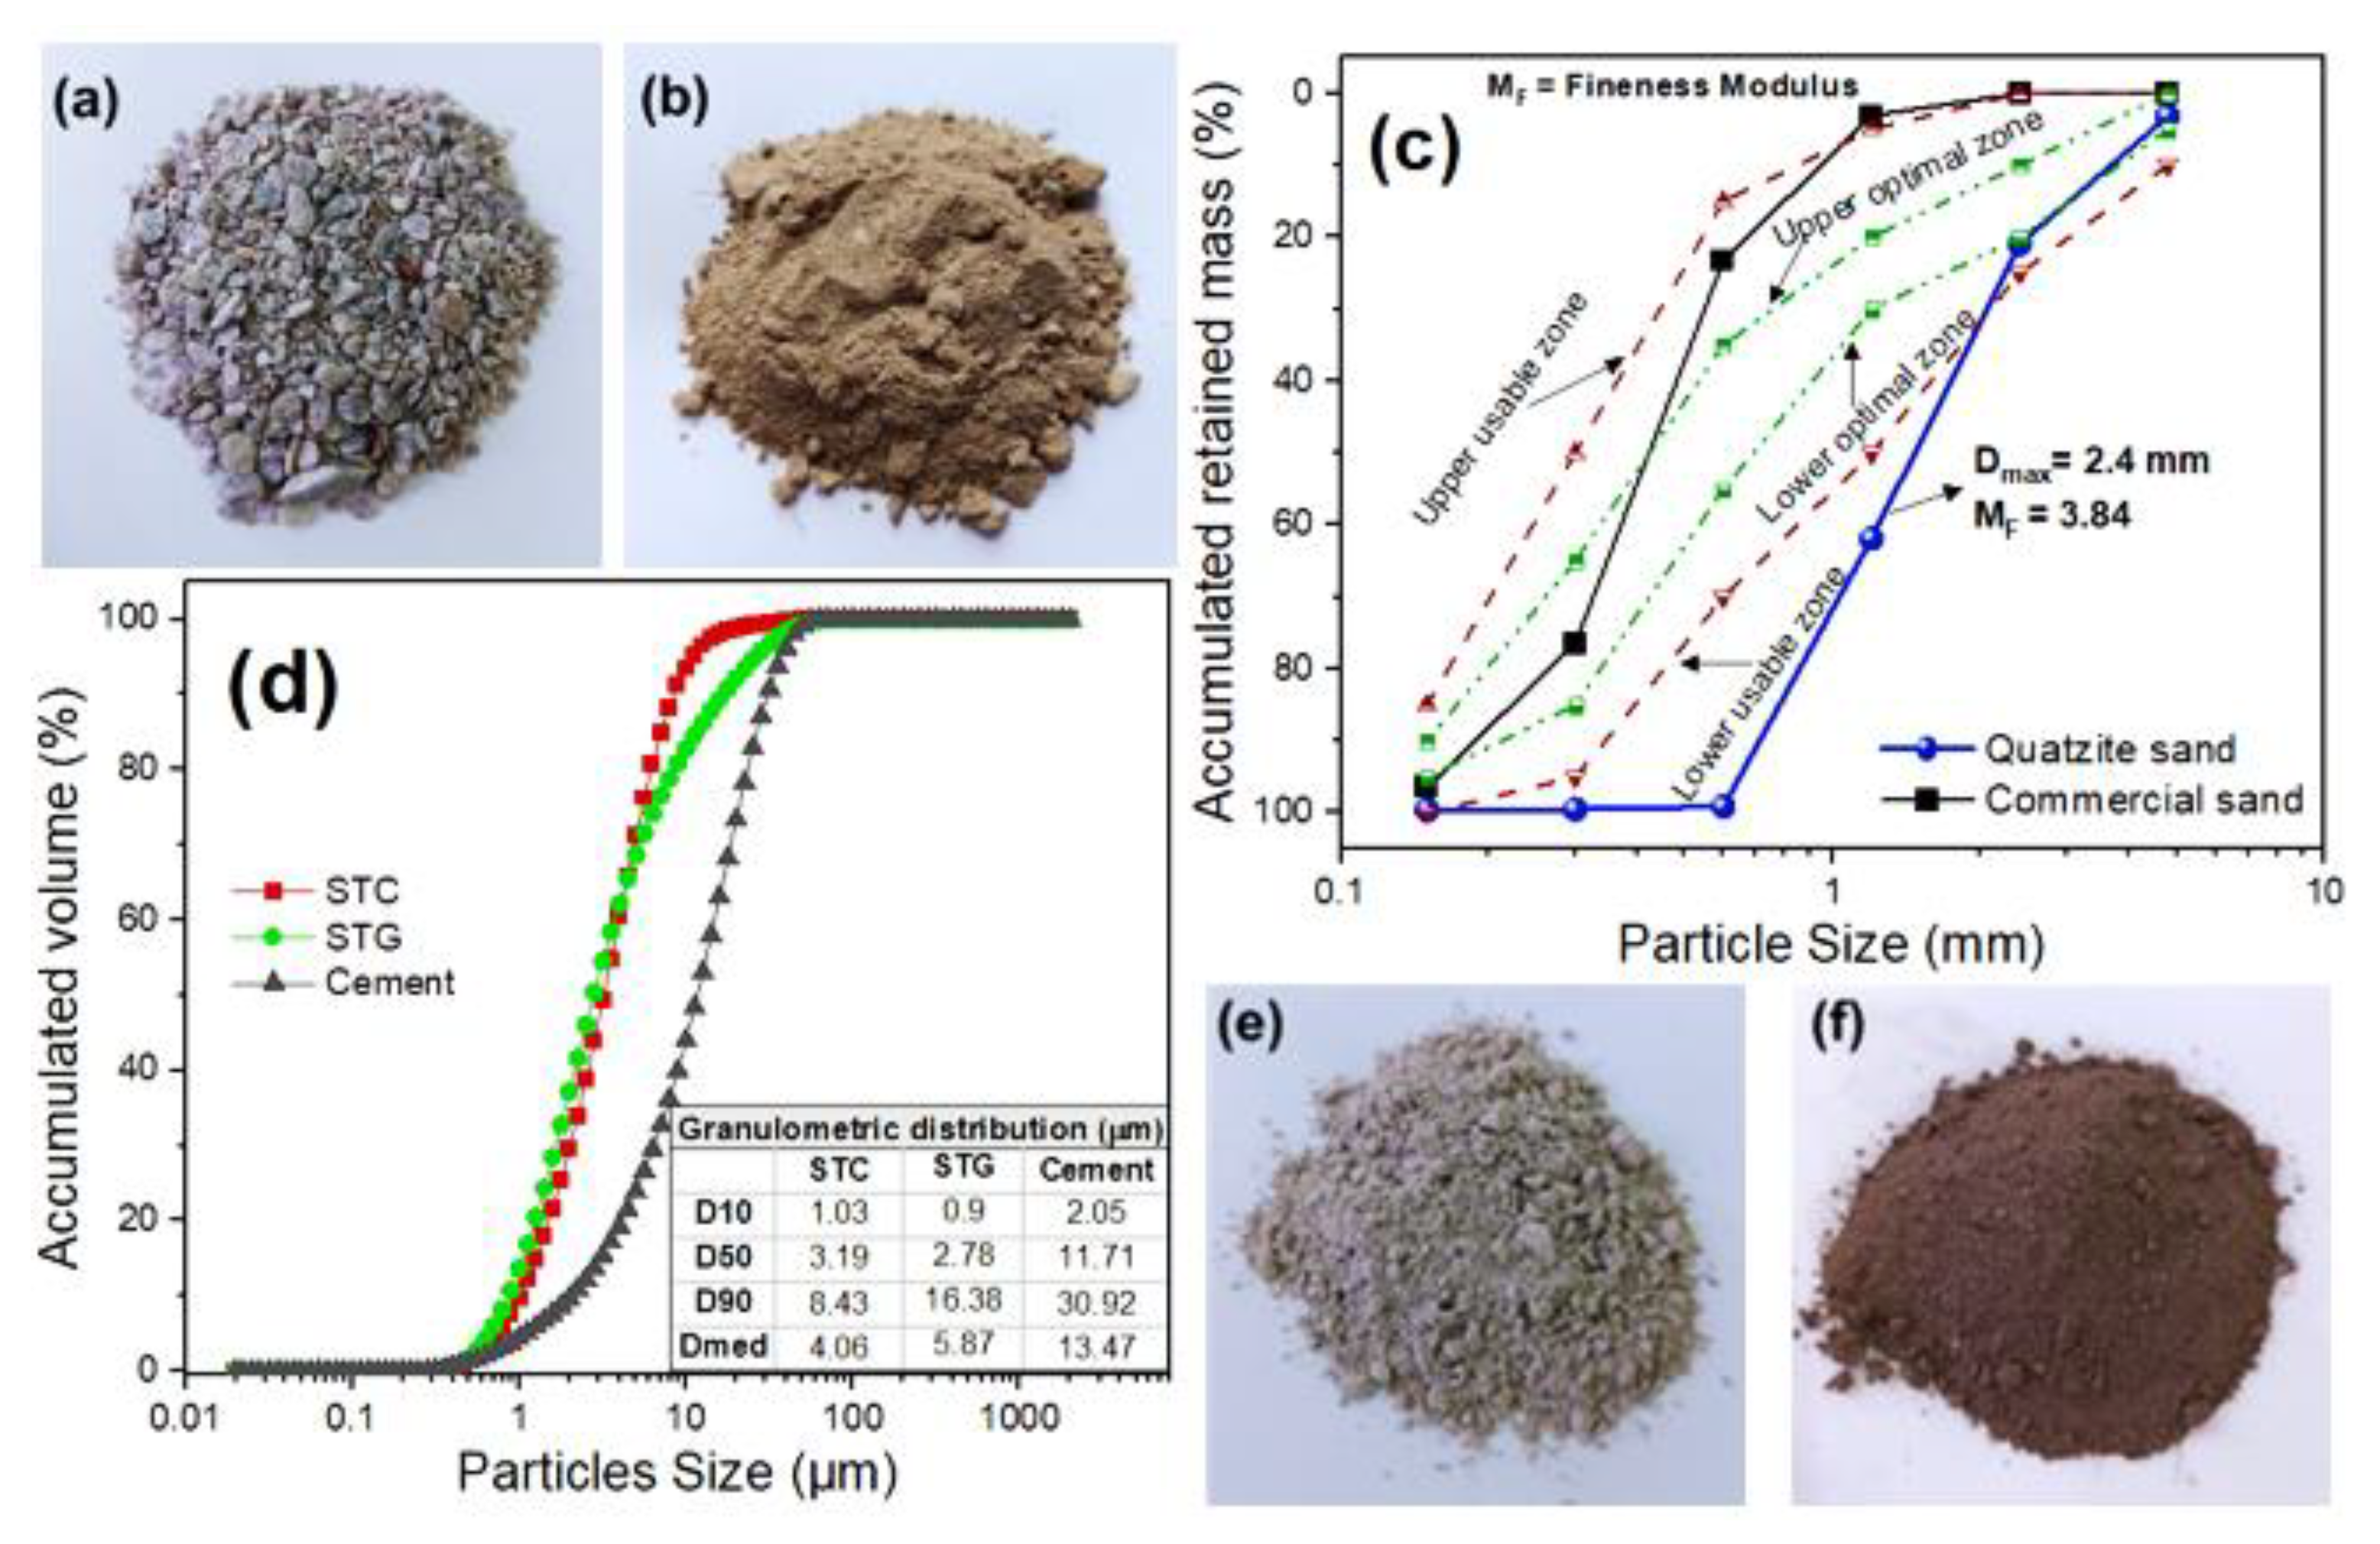 Binder-to-aggregate ratio and chemical analyses of historical mortar